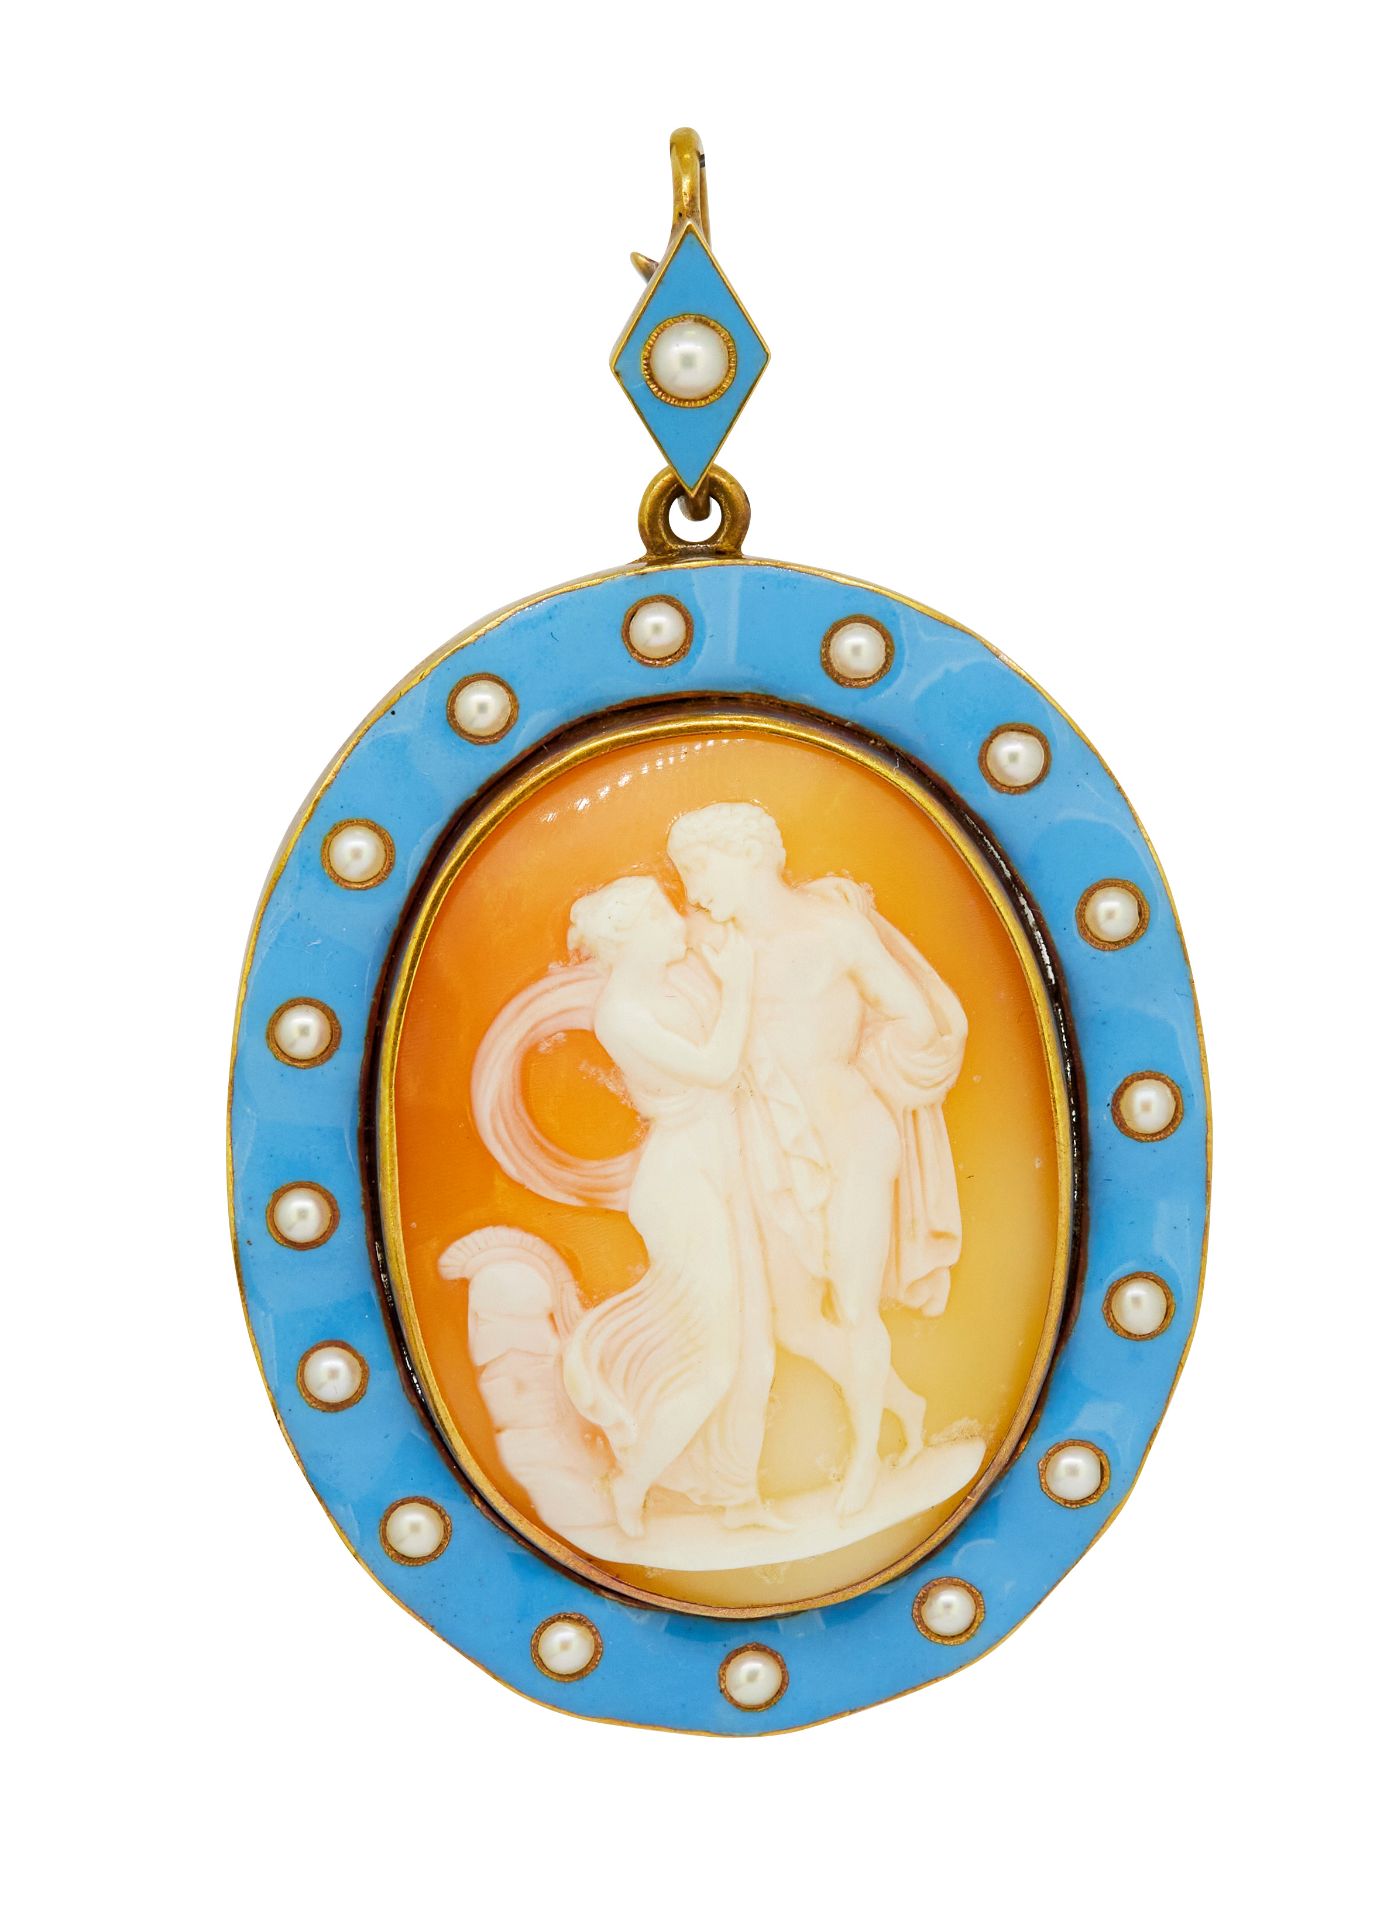 ANTIQUE VICTORIAN CAMEO PEARL AND ENAMEL PENDANT/BROOCH